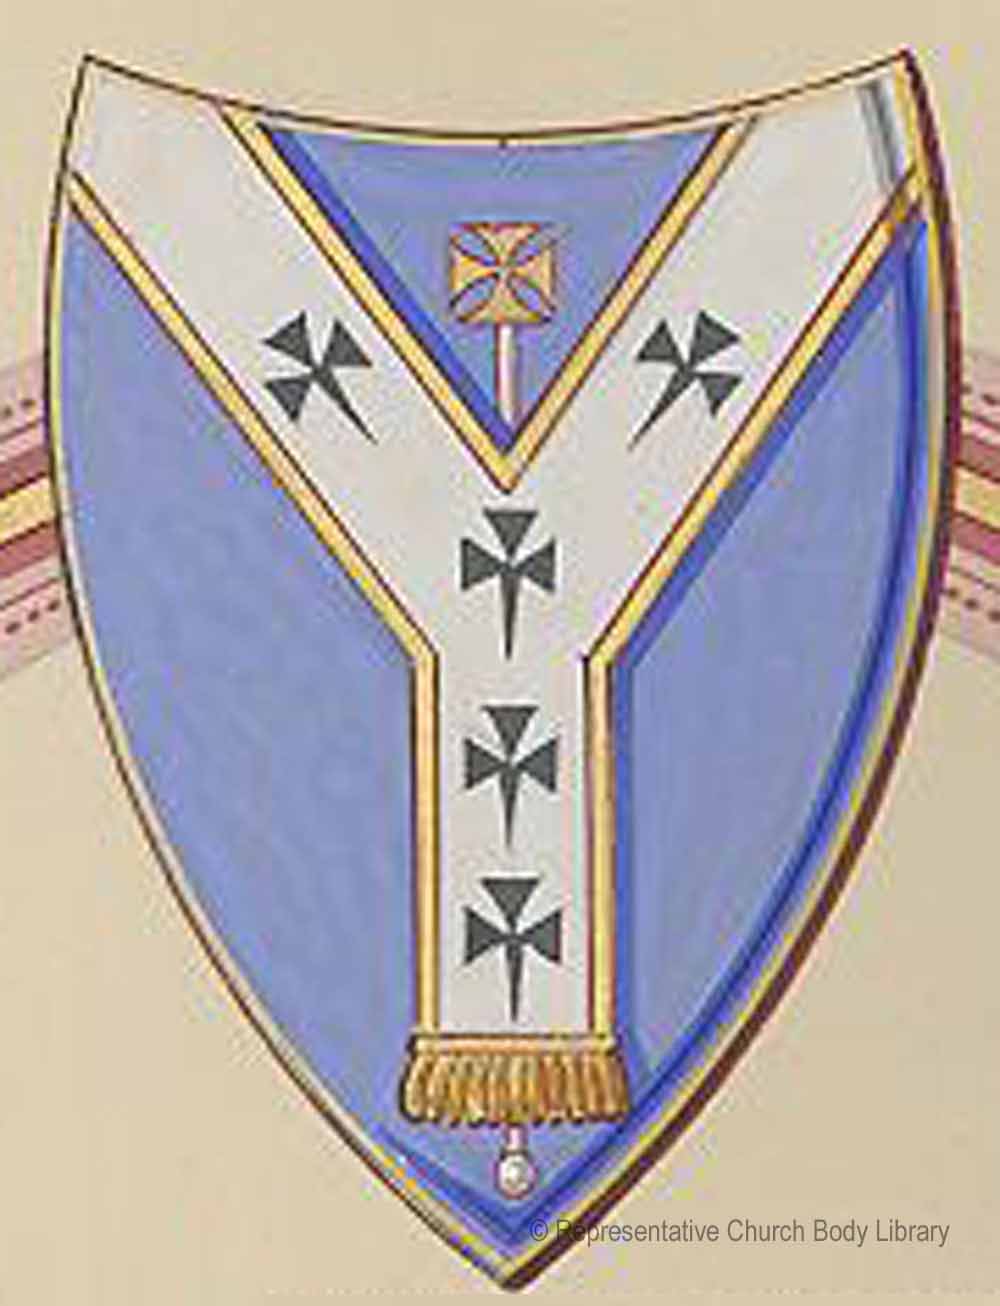 The coat of arms of the diocese of Dublin